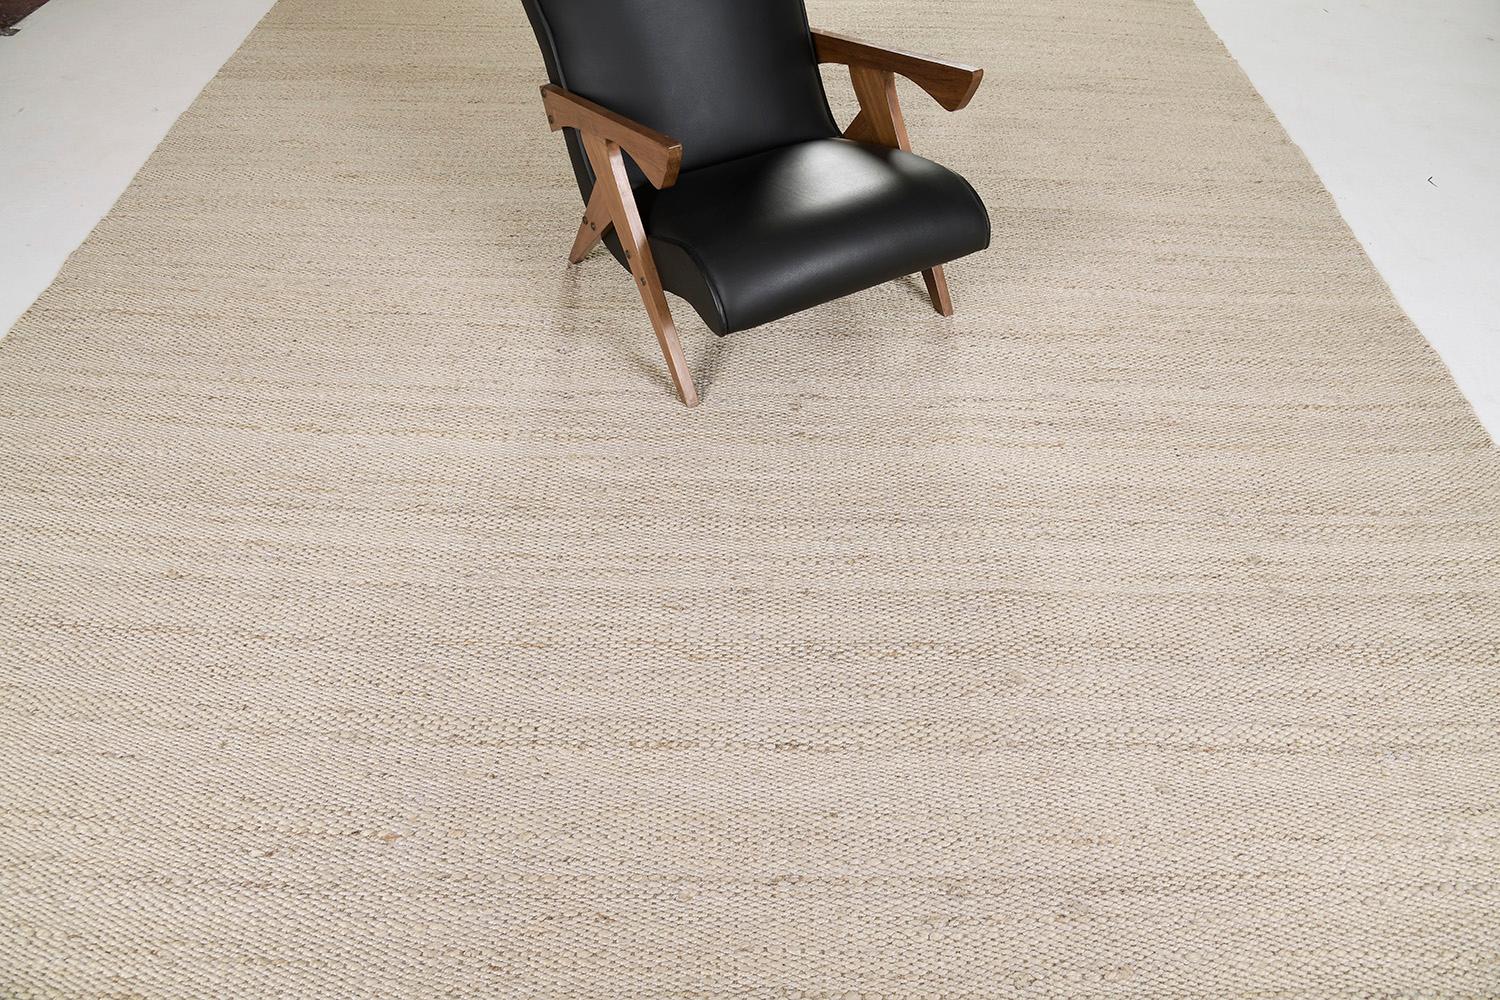 A solid design flatweave features horizontal strokes of gold and brown hemp. Embedded with beautiful tassels that match the simplicity yet a sophisticated kind of masterpiece. This decor will add harmonies to your modern interior and lift the mood